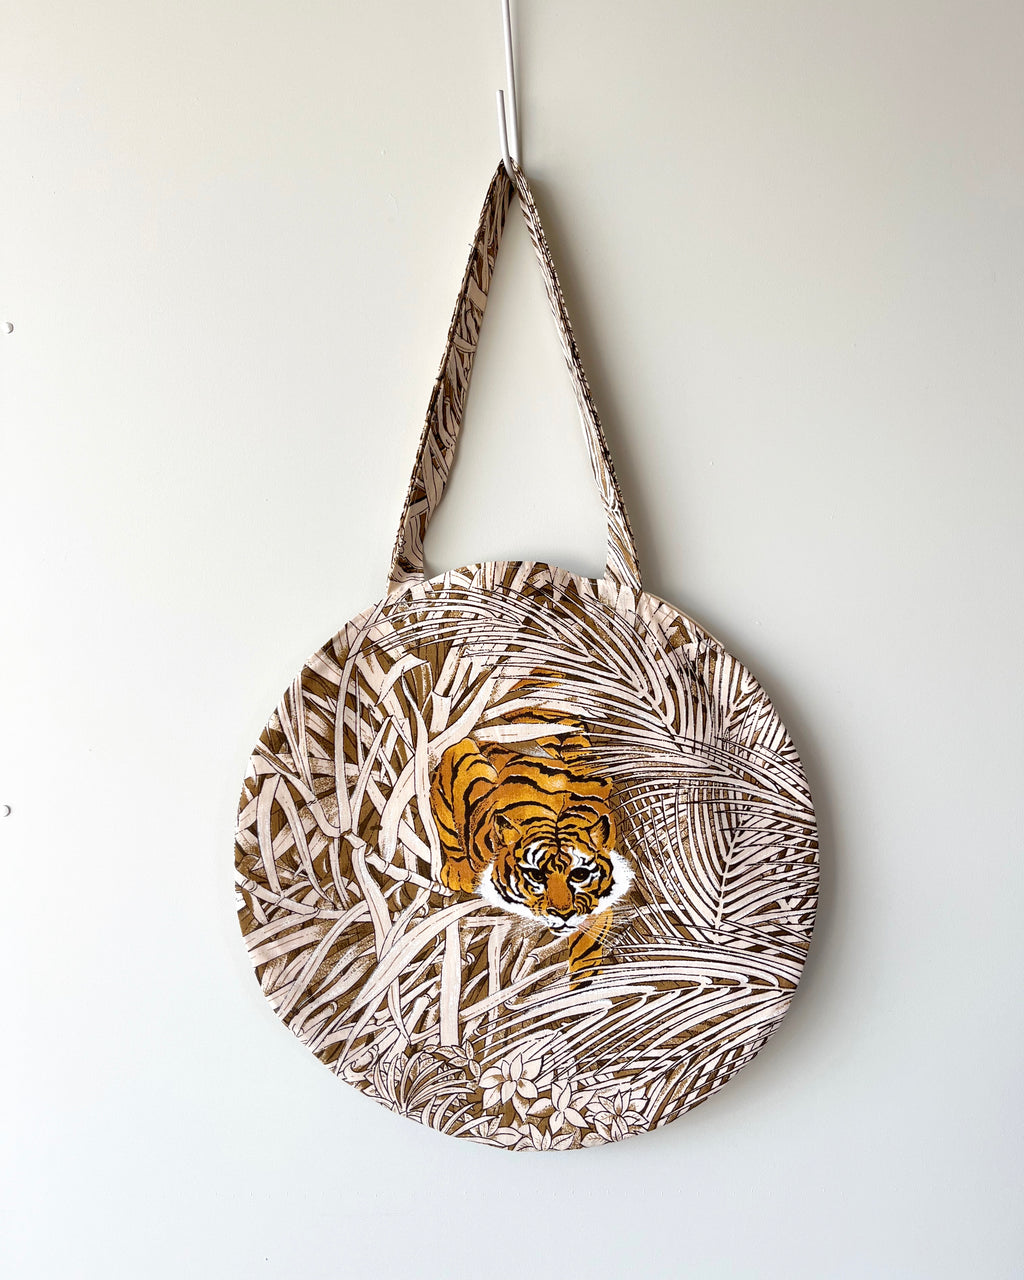 Full Moon Bag Vintage Tiger in the Grass